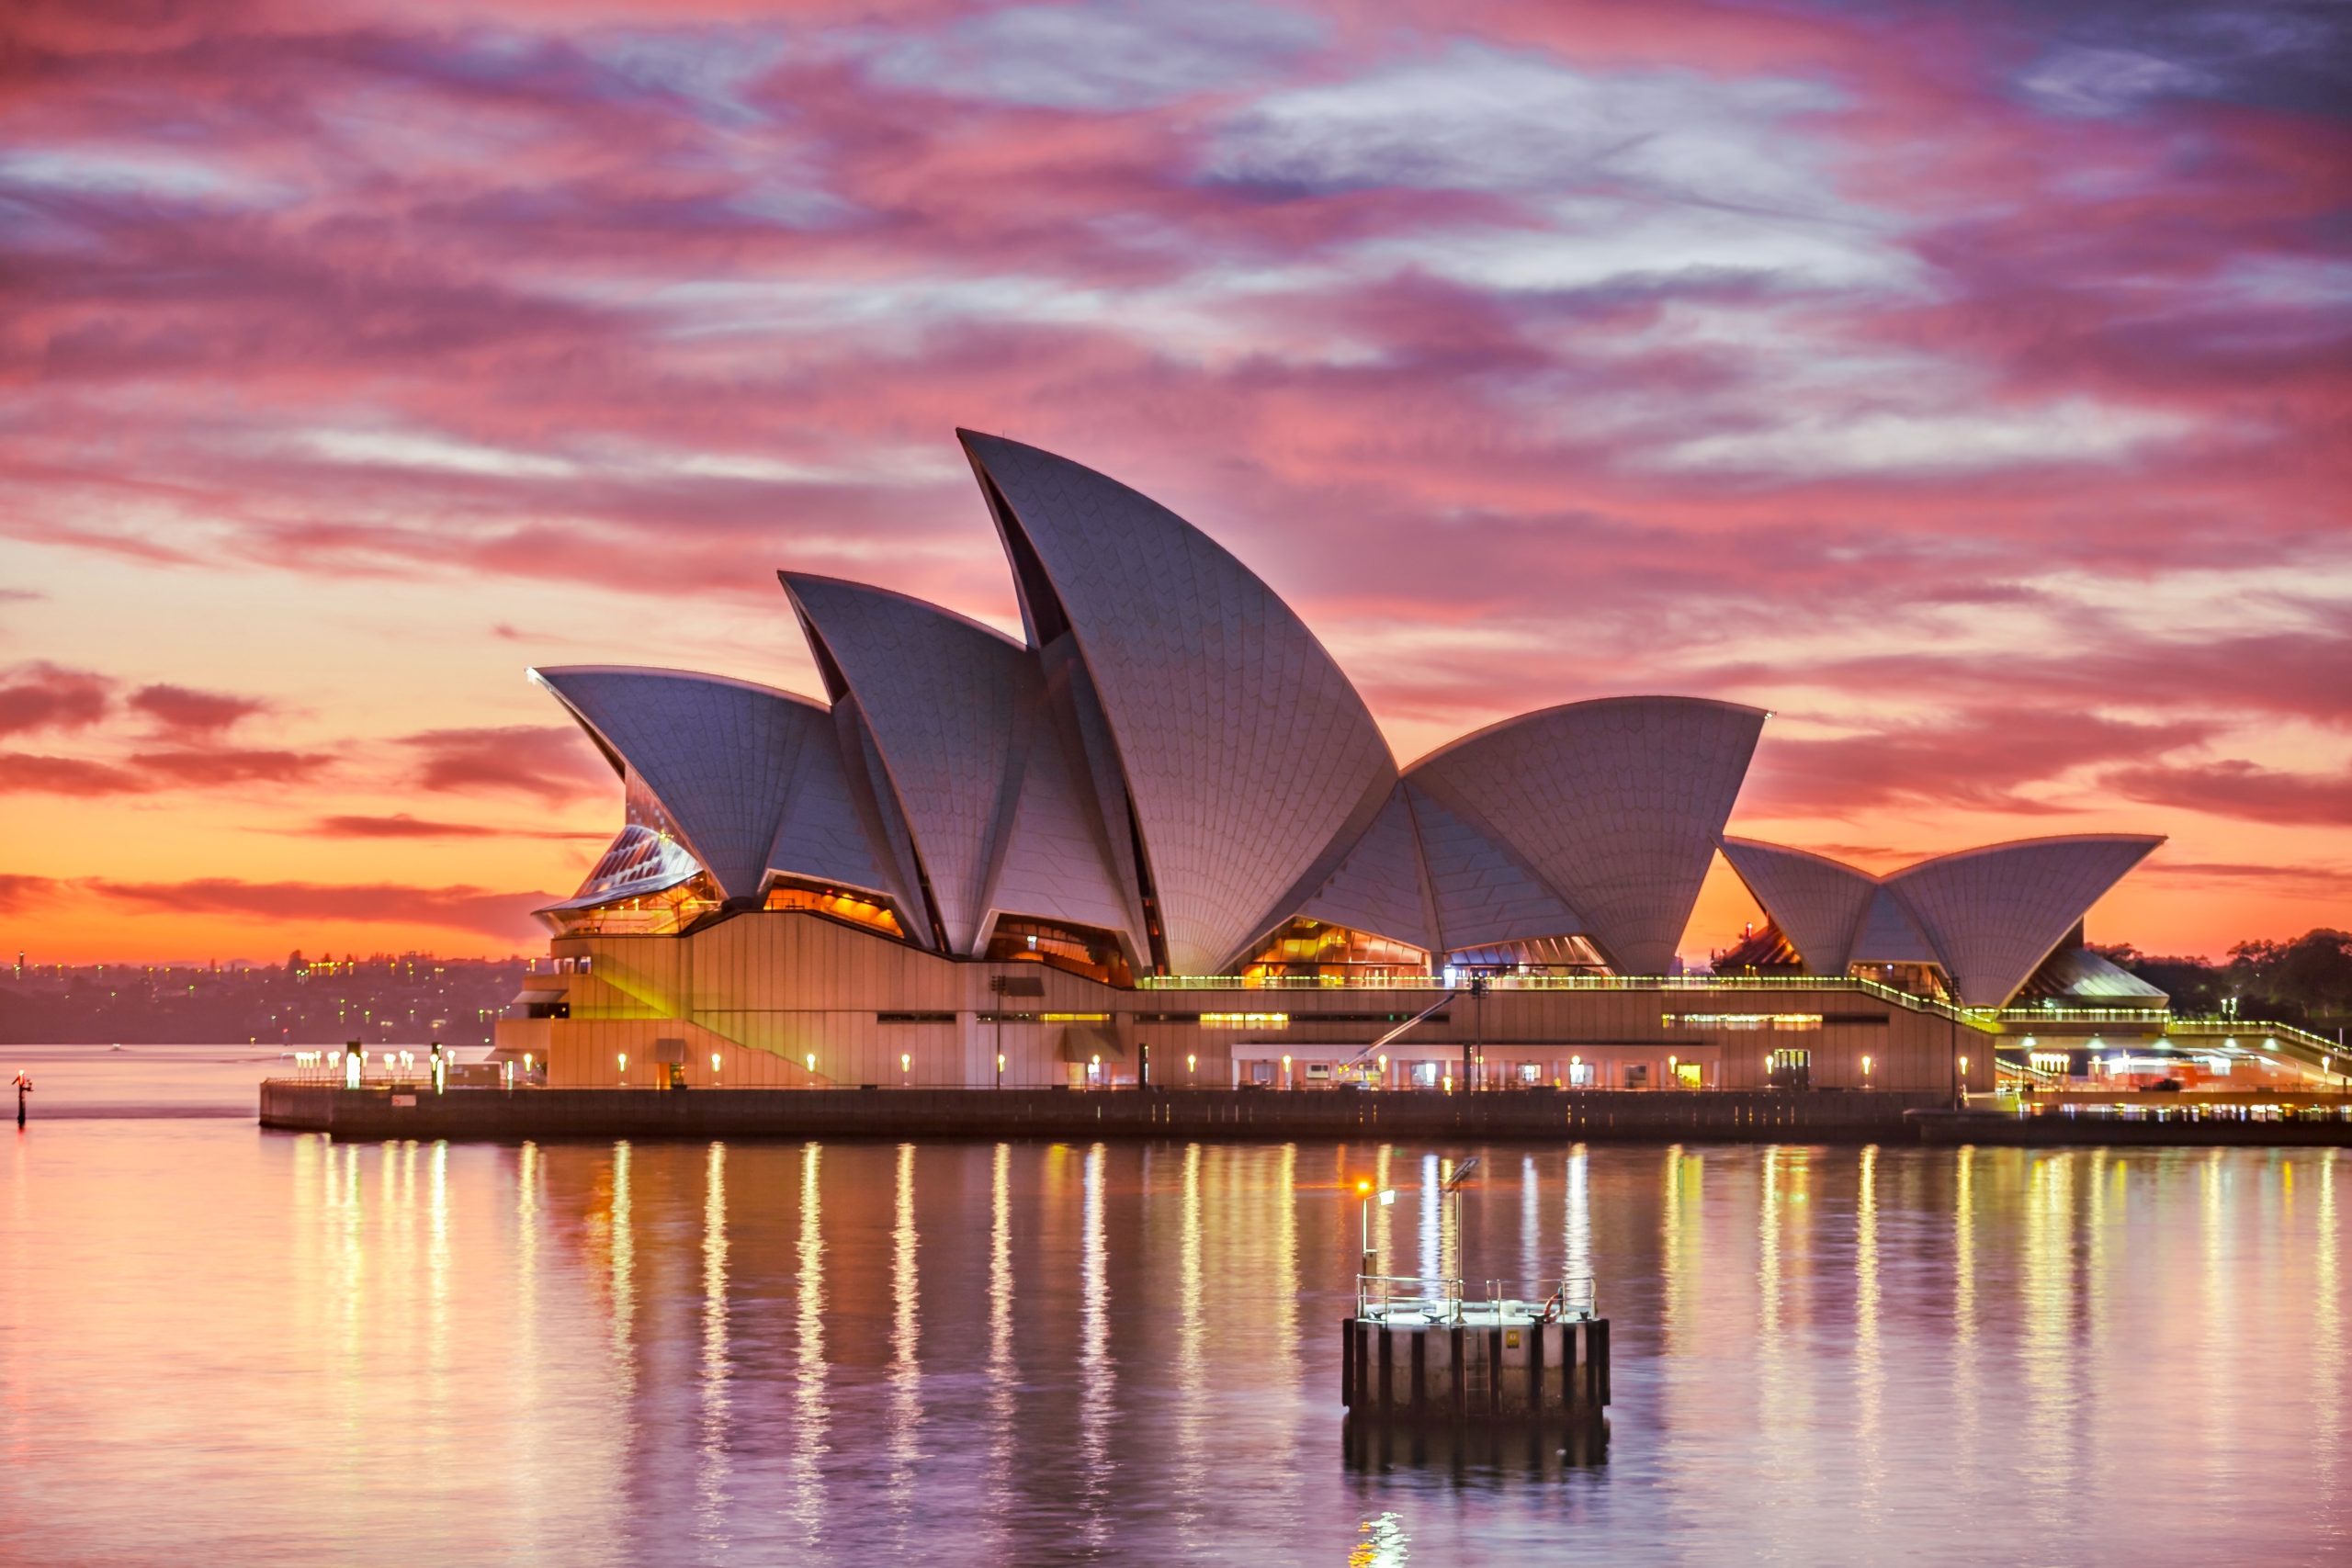 australia placing restrictions on cfds